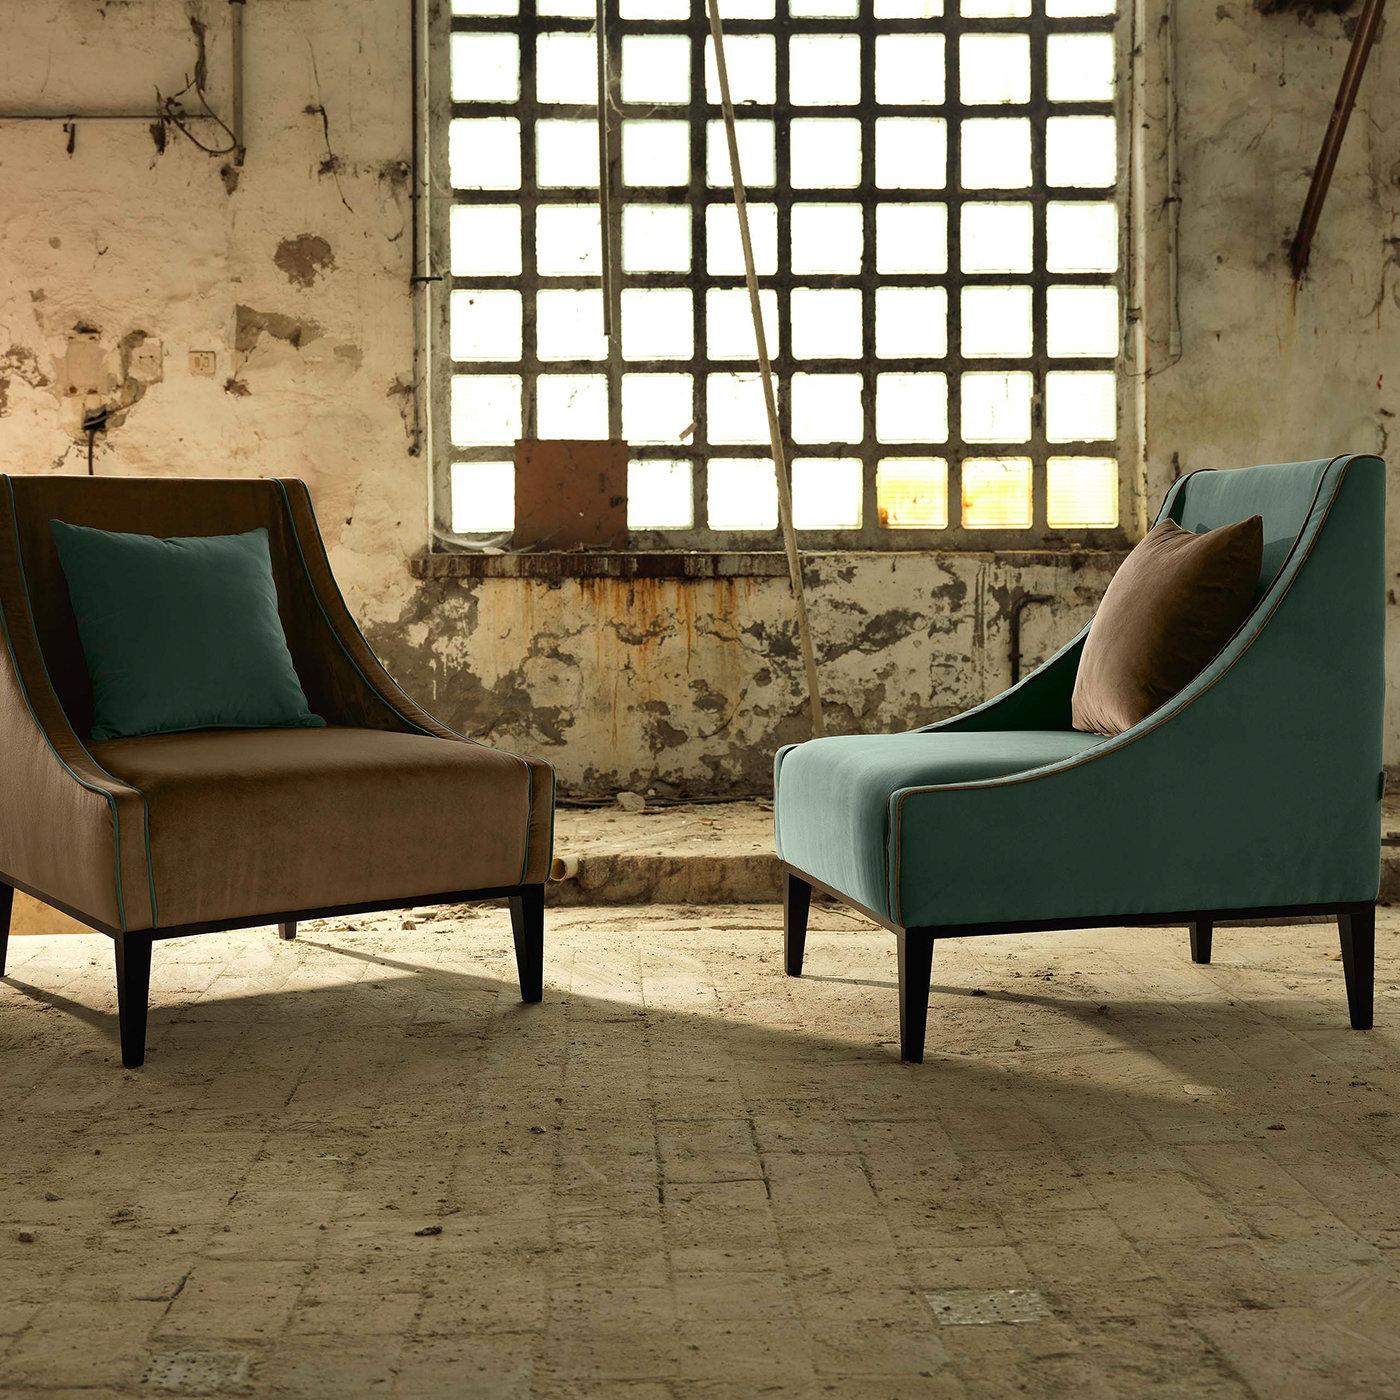 An effortless combination of comfort and style, this armchair will add sophistication to an elegant home, with its clean lines and harmonious volumes. The polyurethane-padded frame is covered in powder-blue Dacron that provides a modern appeal to